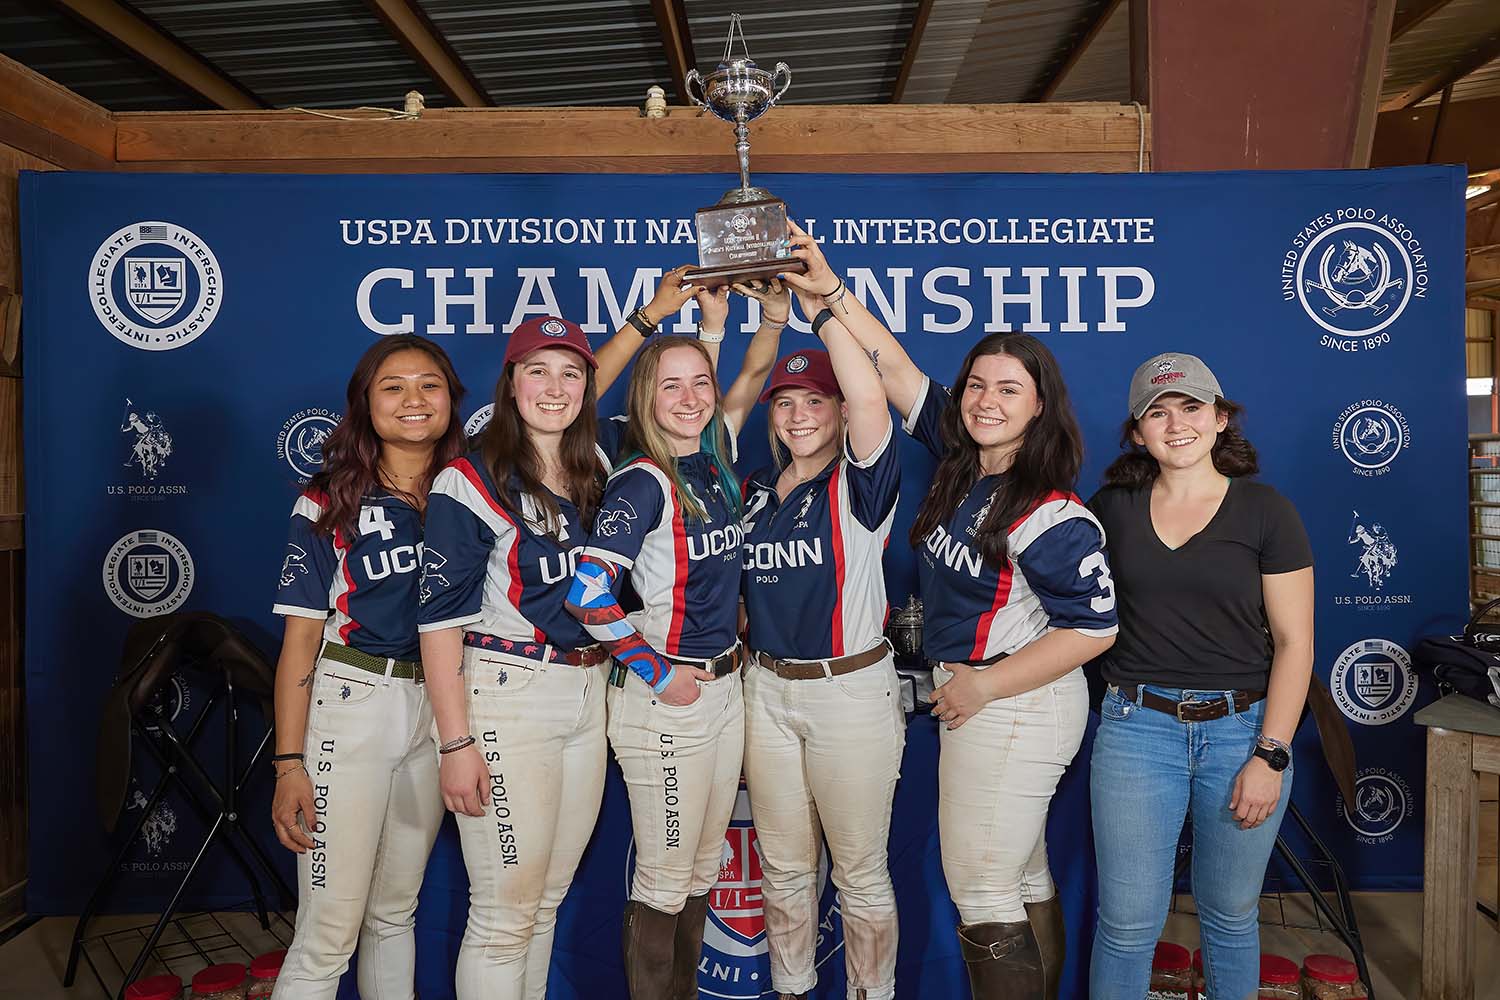 The Women's Polo Team posing with their championship trophy